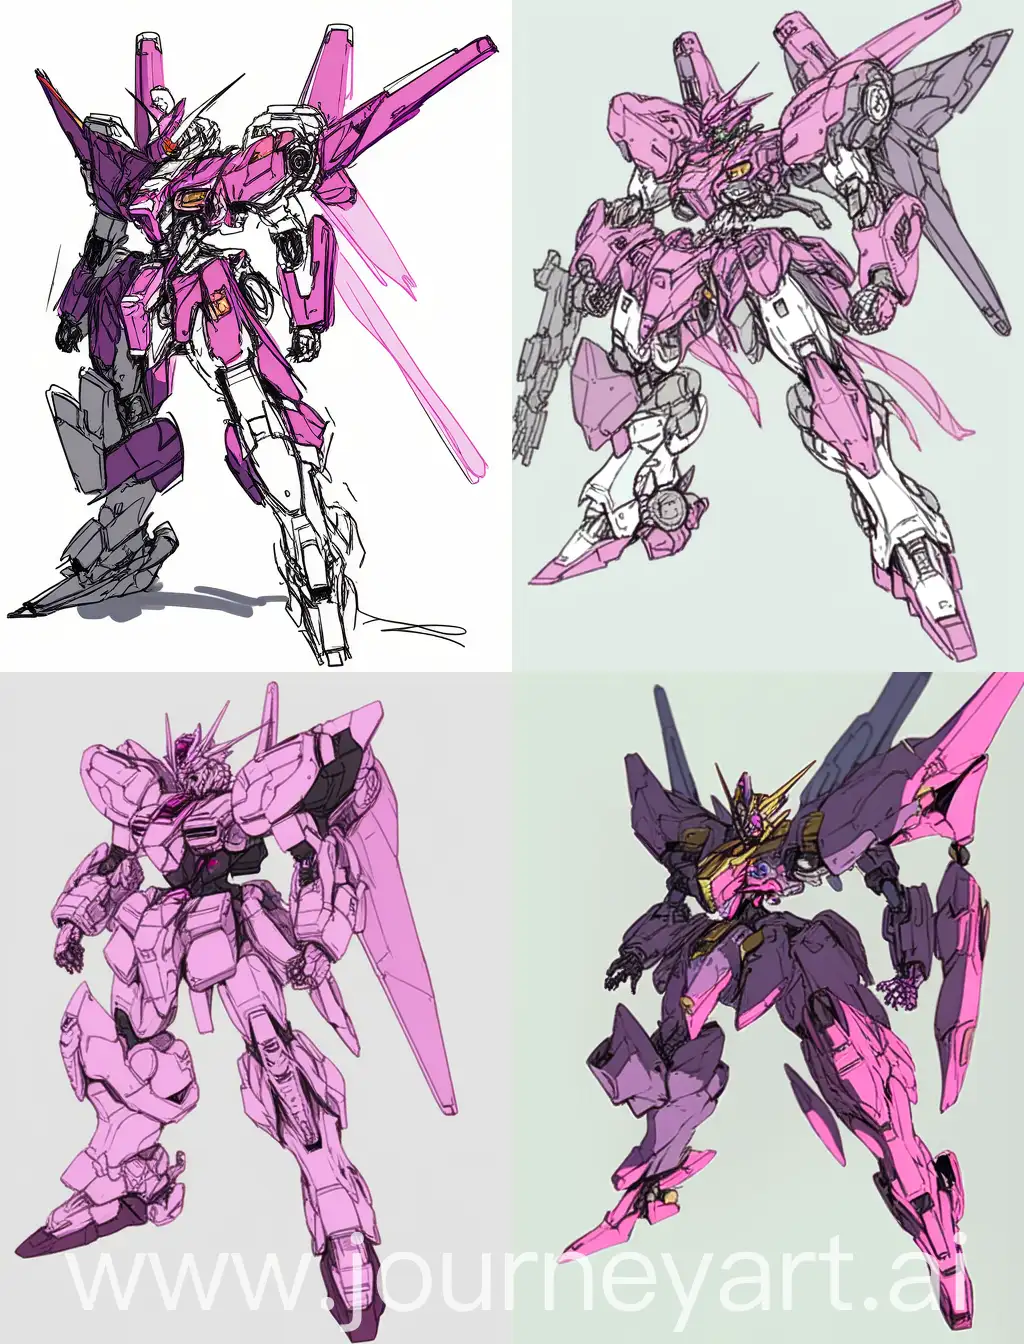 Full length gundam, Gundam mecha,in the style of Gundam, sketch of a drawing, face mecha, spider gundam, normal gundam torso, back legs of gundam spider fur, primary color amaranth purple, small details in black and white, gundam eyes in pink, glowing parts also in pink, displayed in a fighting posture, studio environment,fighting posture,soft ambient light. super details, metallic texture and tensioncomposition, OC Render. 2D. ultra HD16k